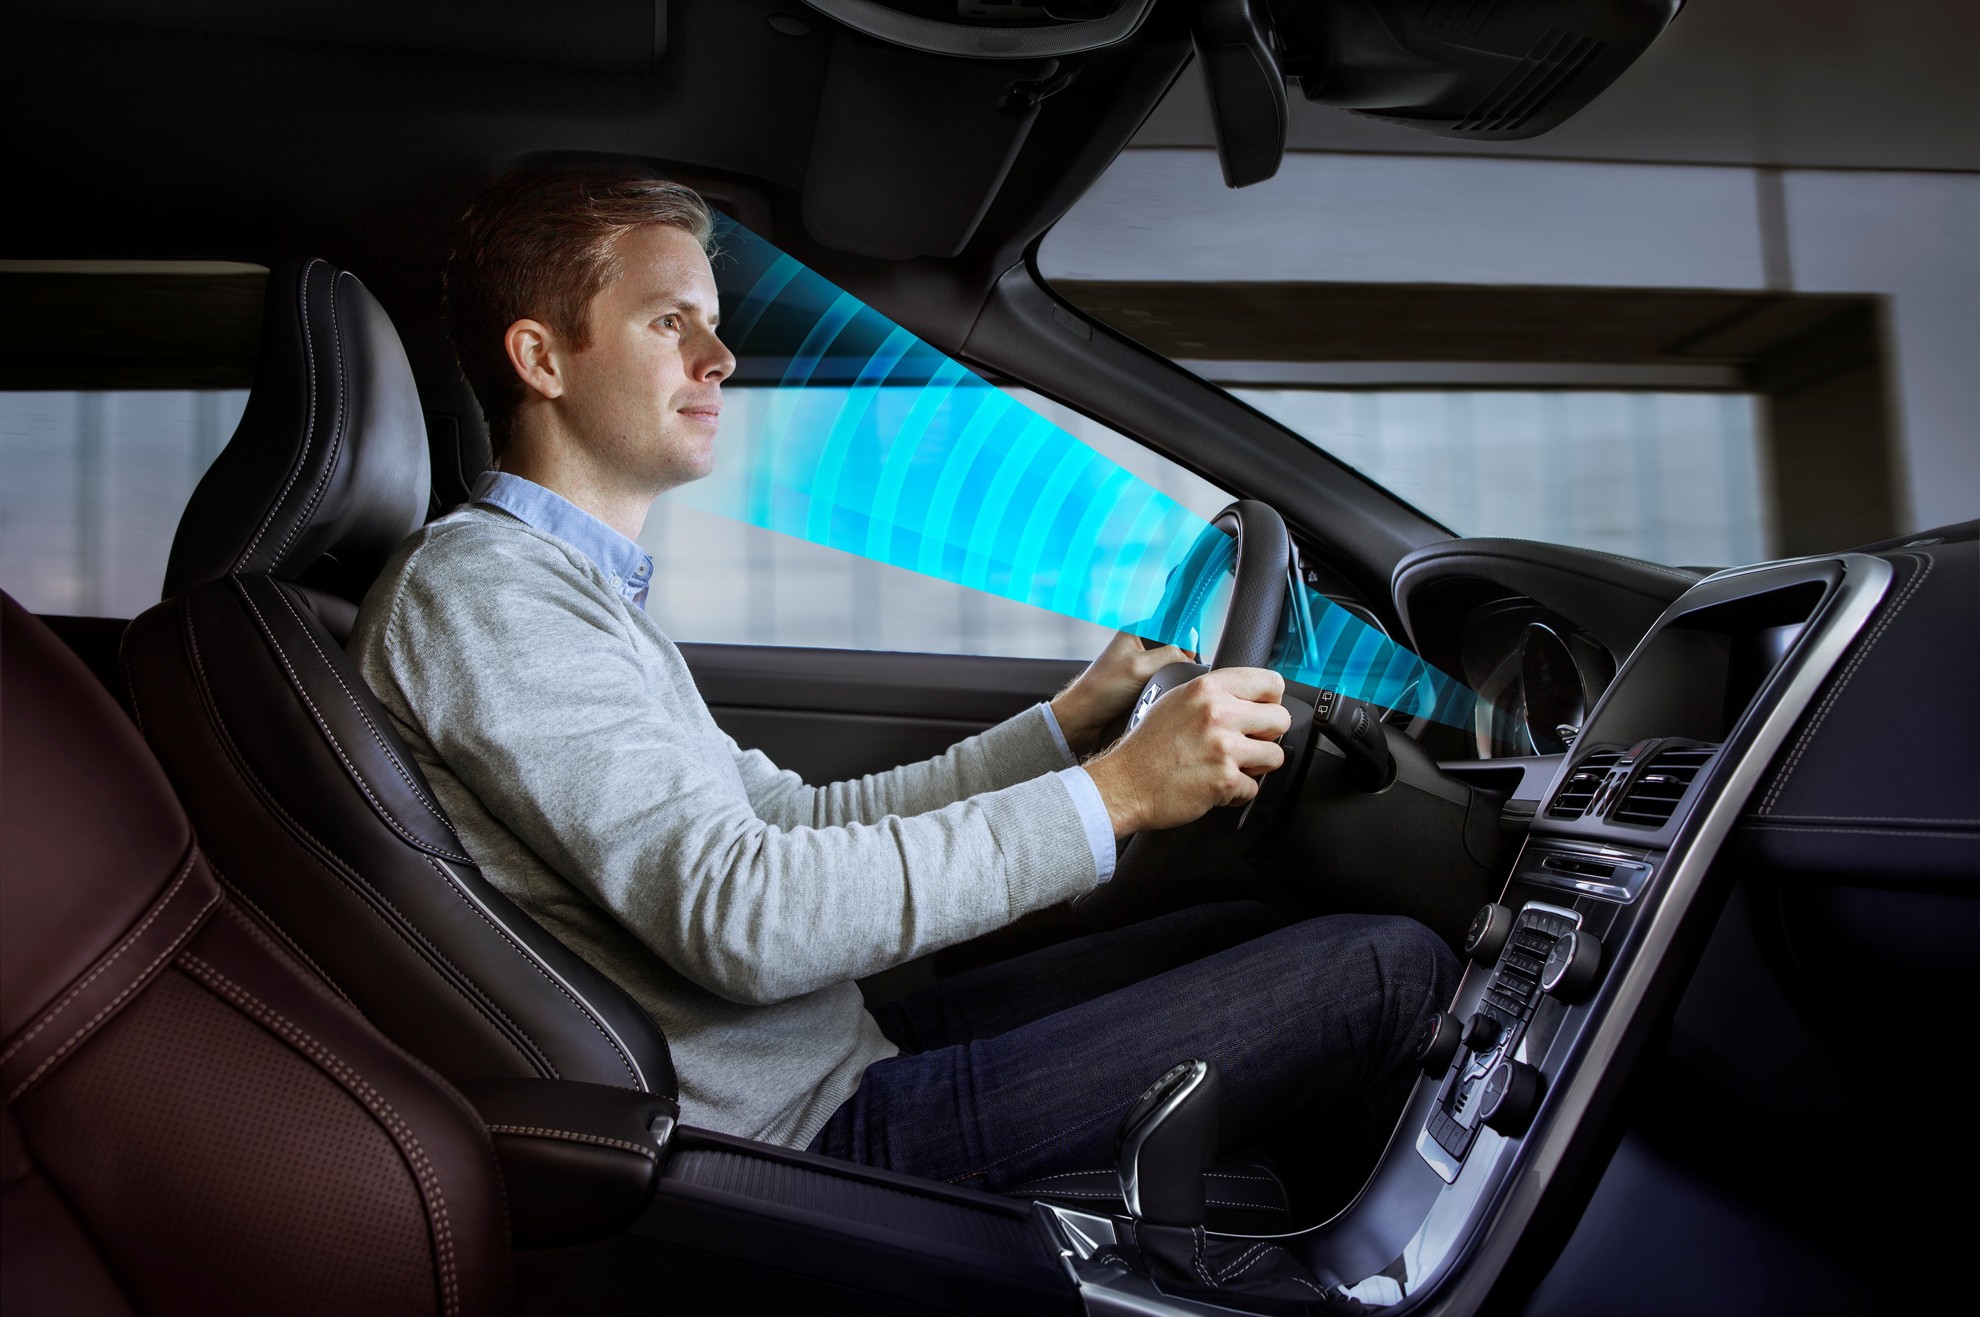 Volvo Conducts Awesome Technology Research to get to know their drivers